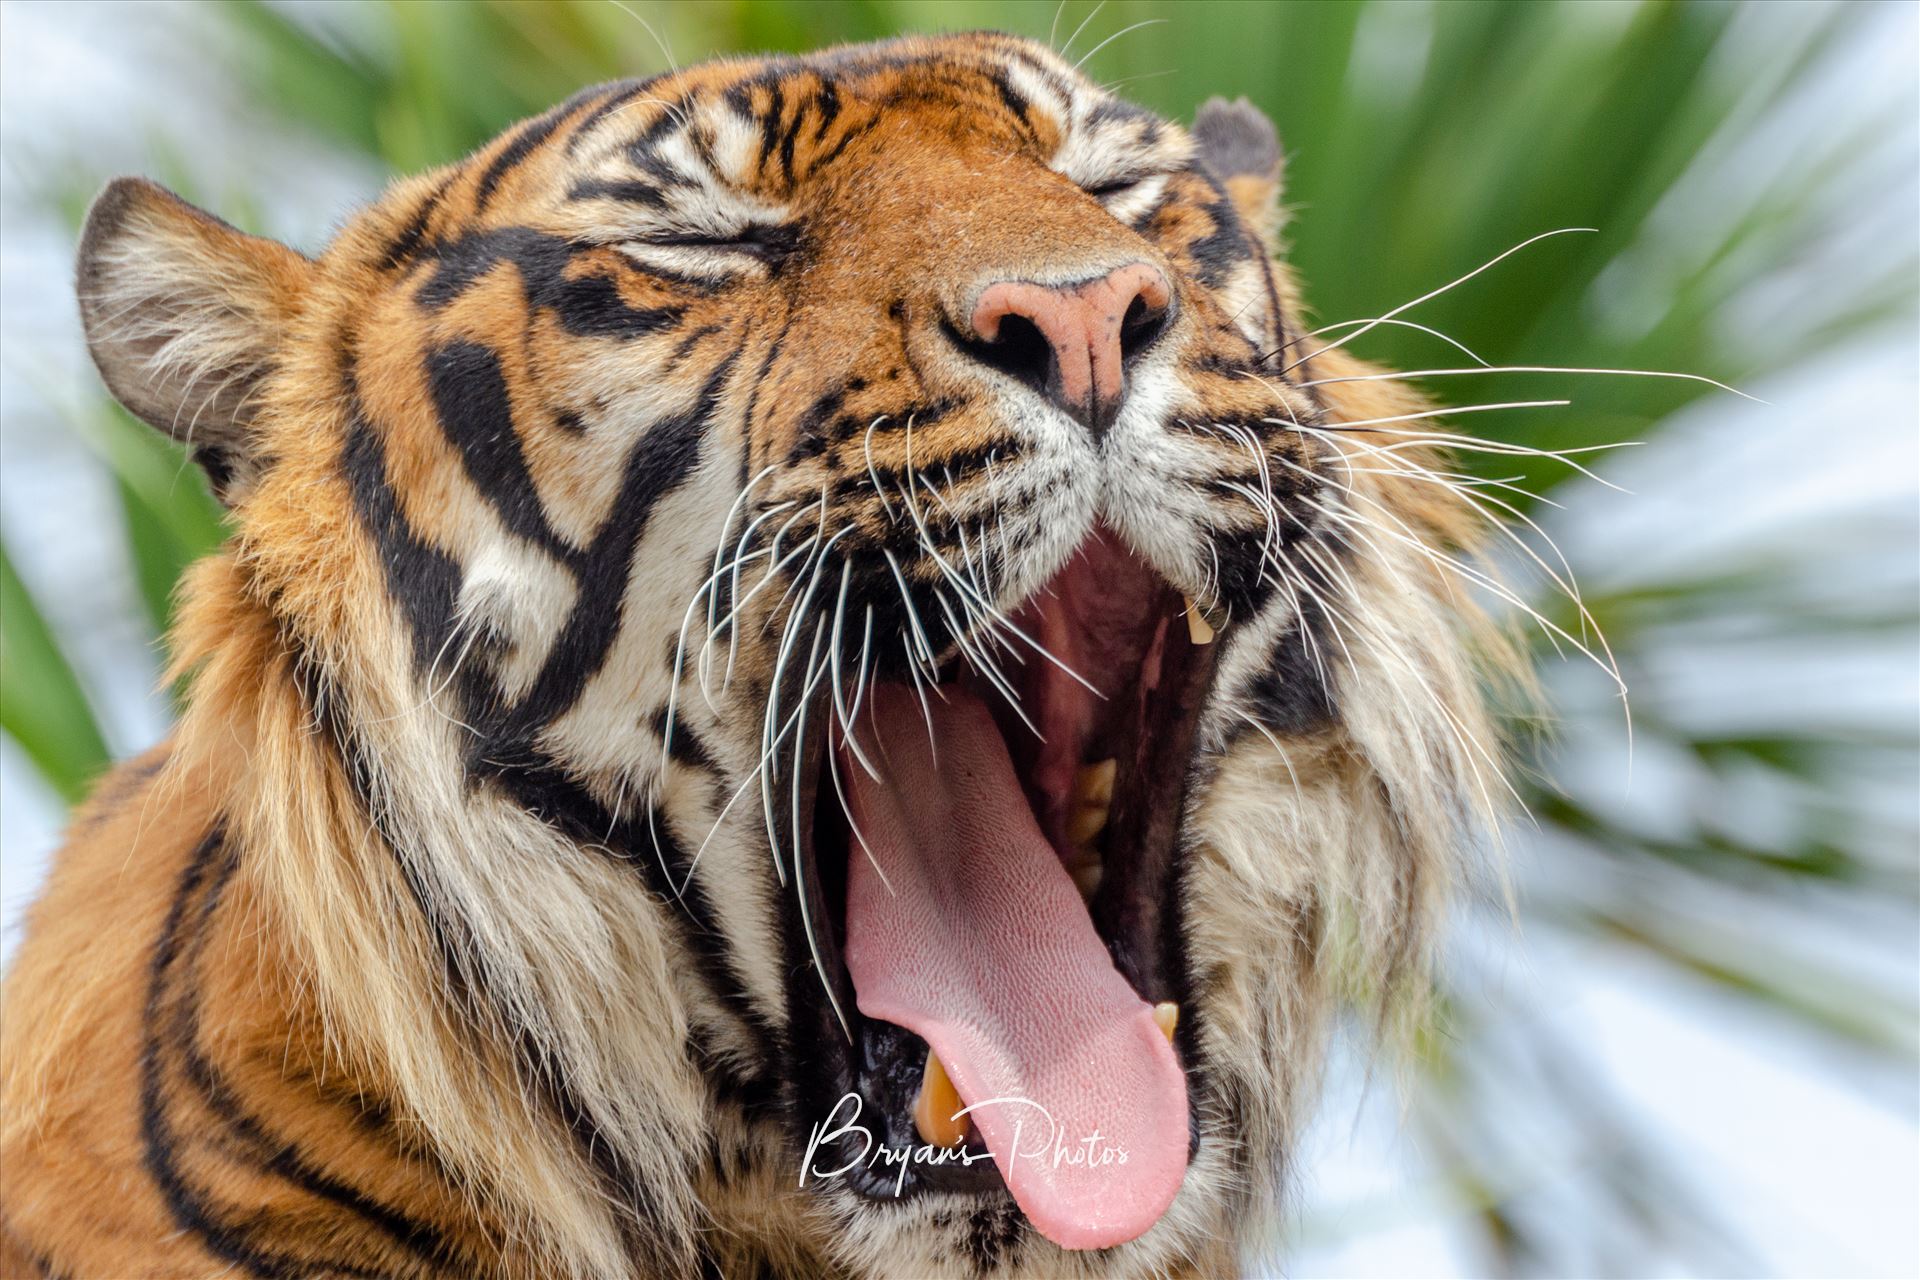 Sleepy Tiger A photograph of a Sumatran Tiger yawning as it wakes up from it's afternoon nap. by Bryans Photos